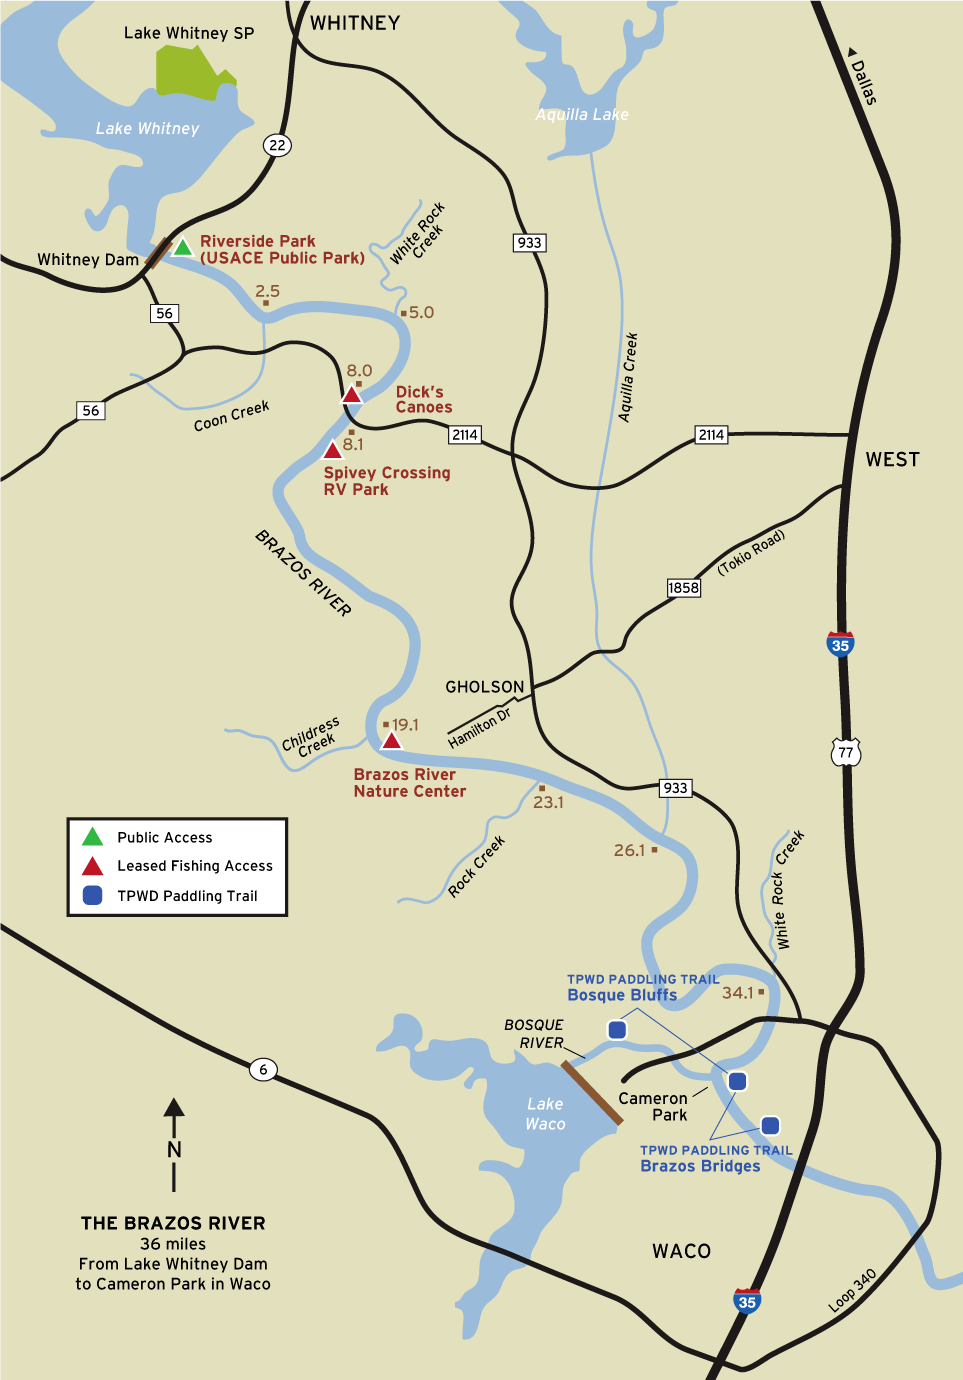 Map of Brazos River from Lake Whitney to Waco